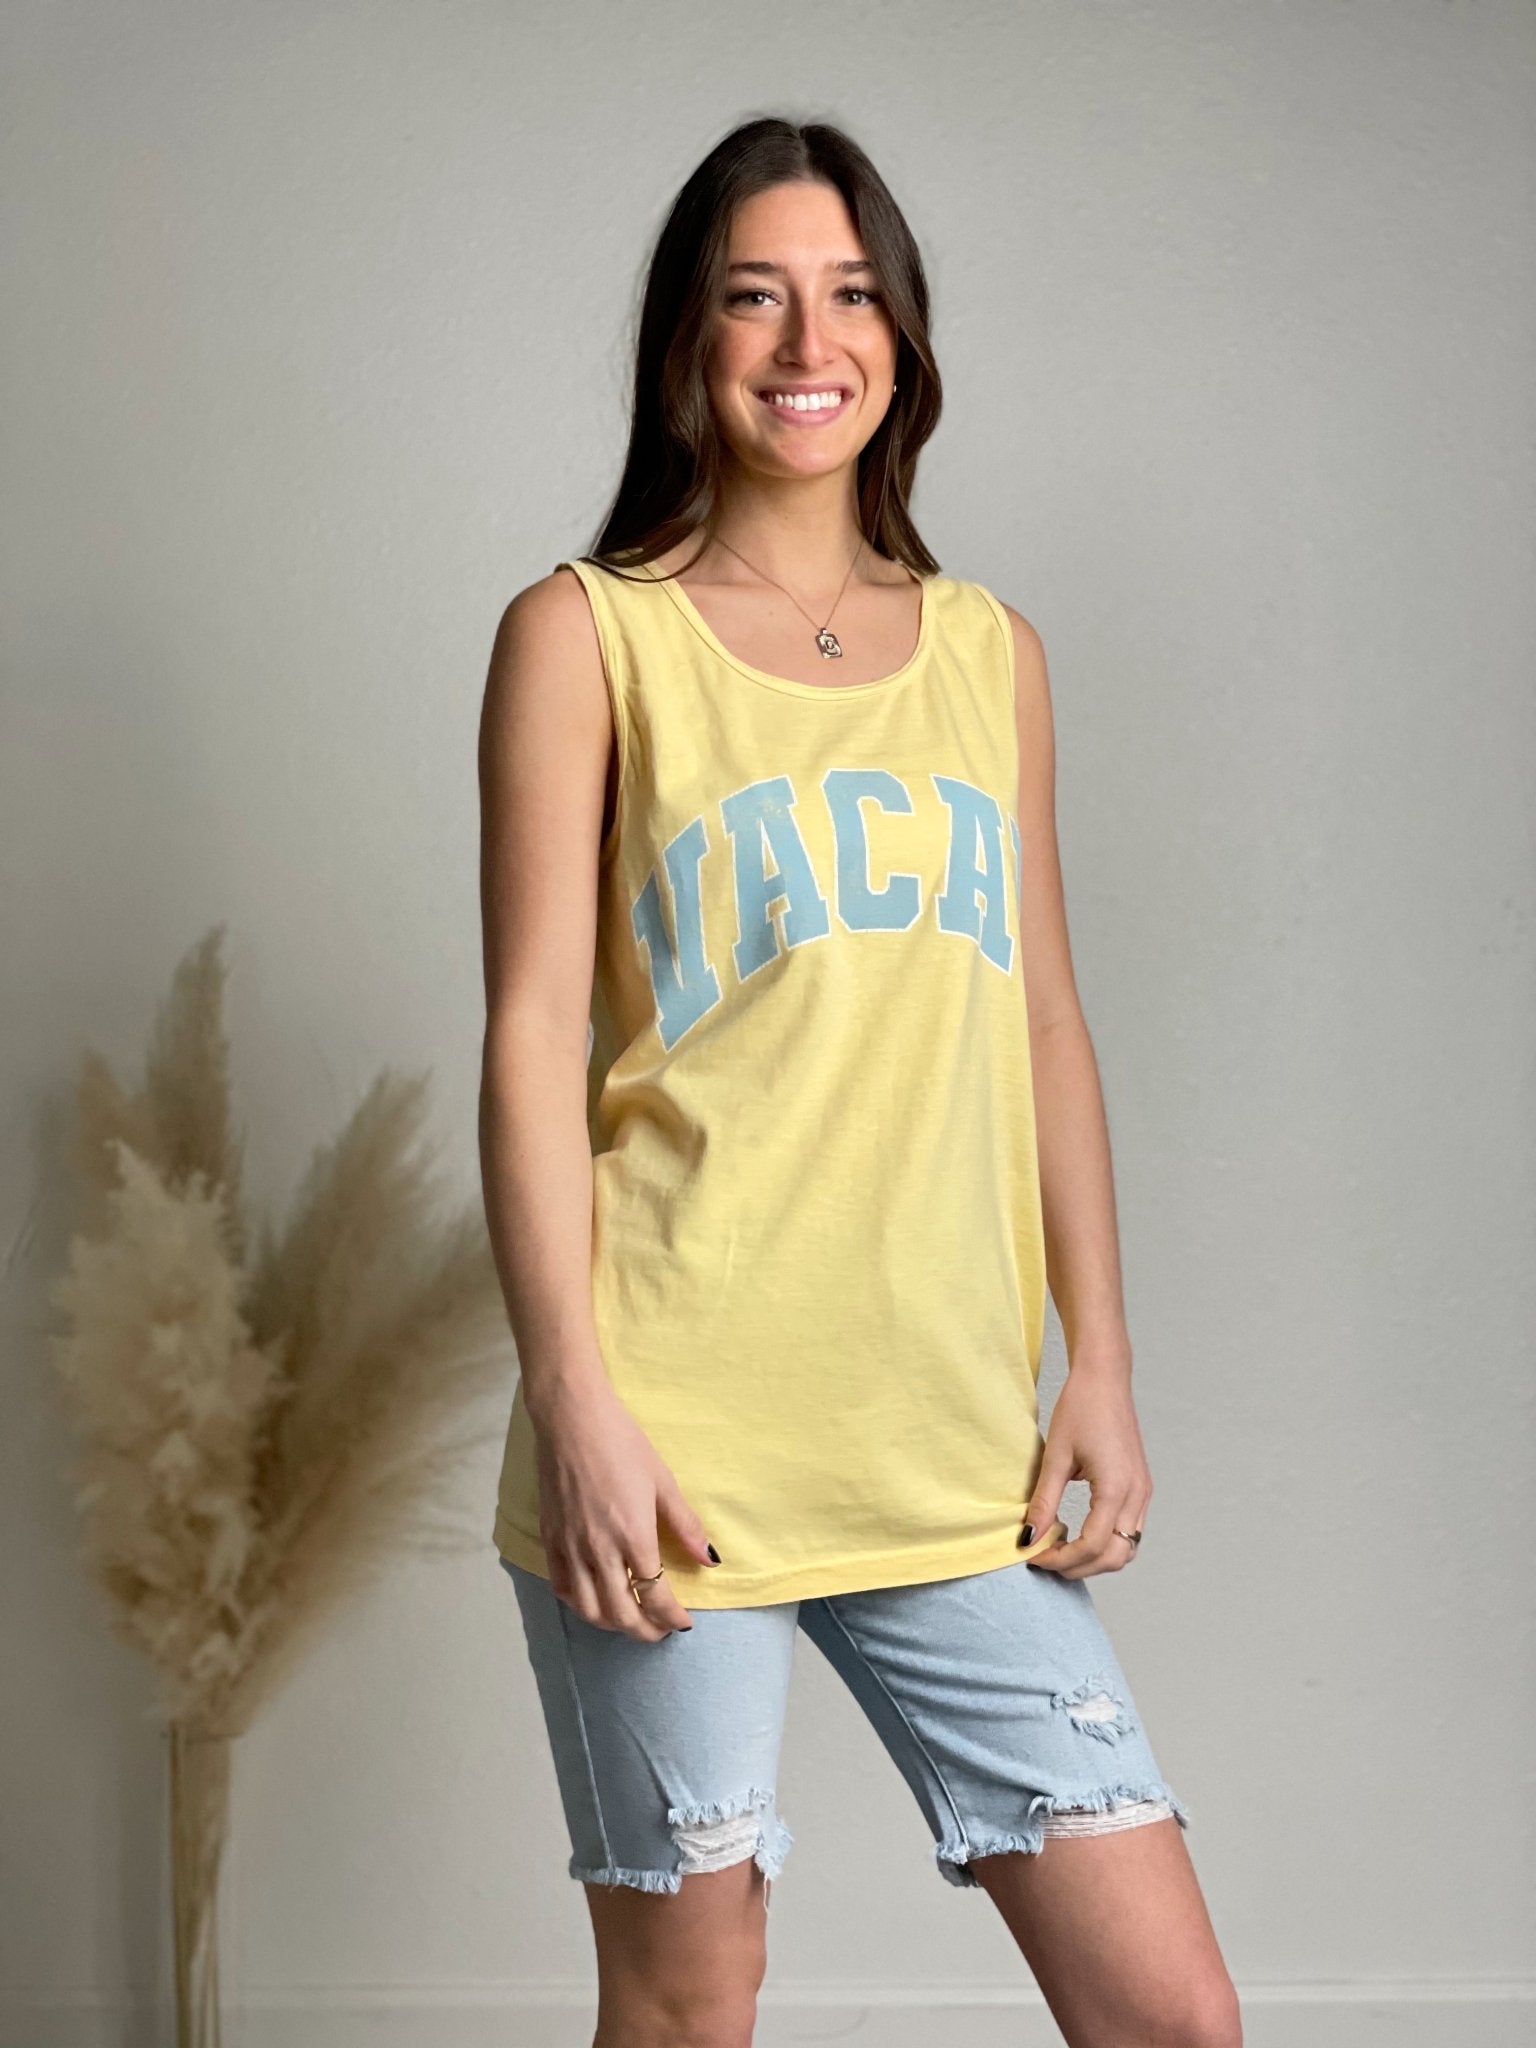 Vacay distressed tank top butter - Stylish Tank Top - Trendy Staycation Outfits at Lush Fashion Lounge Boutique in Oklahoma City